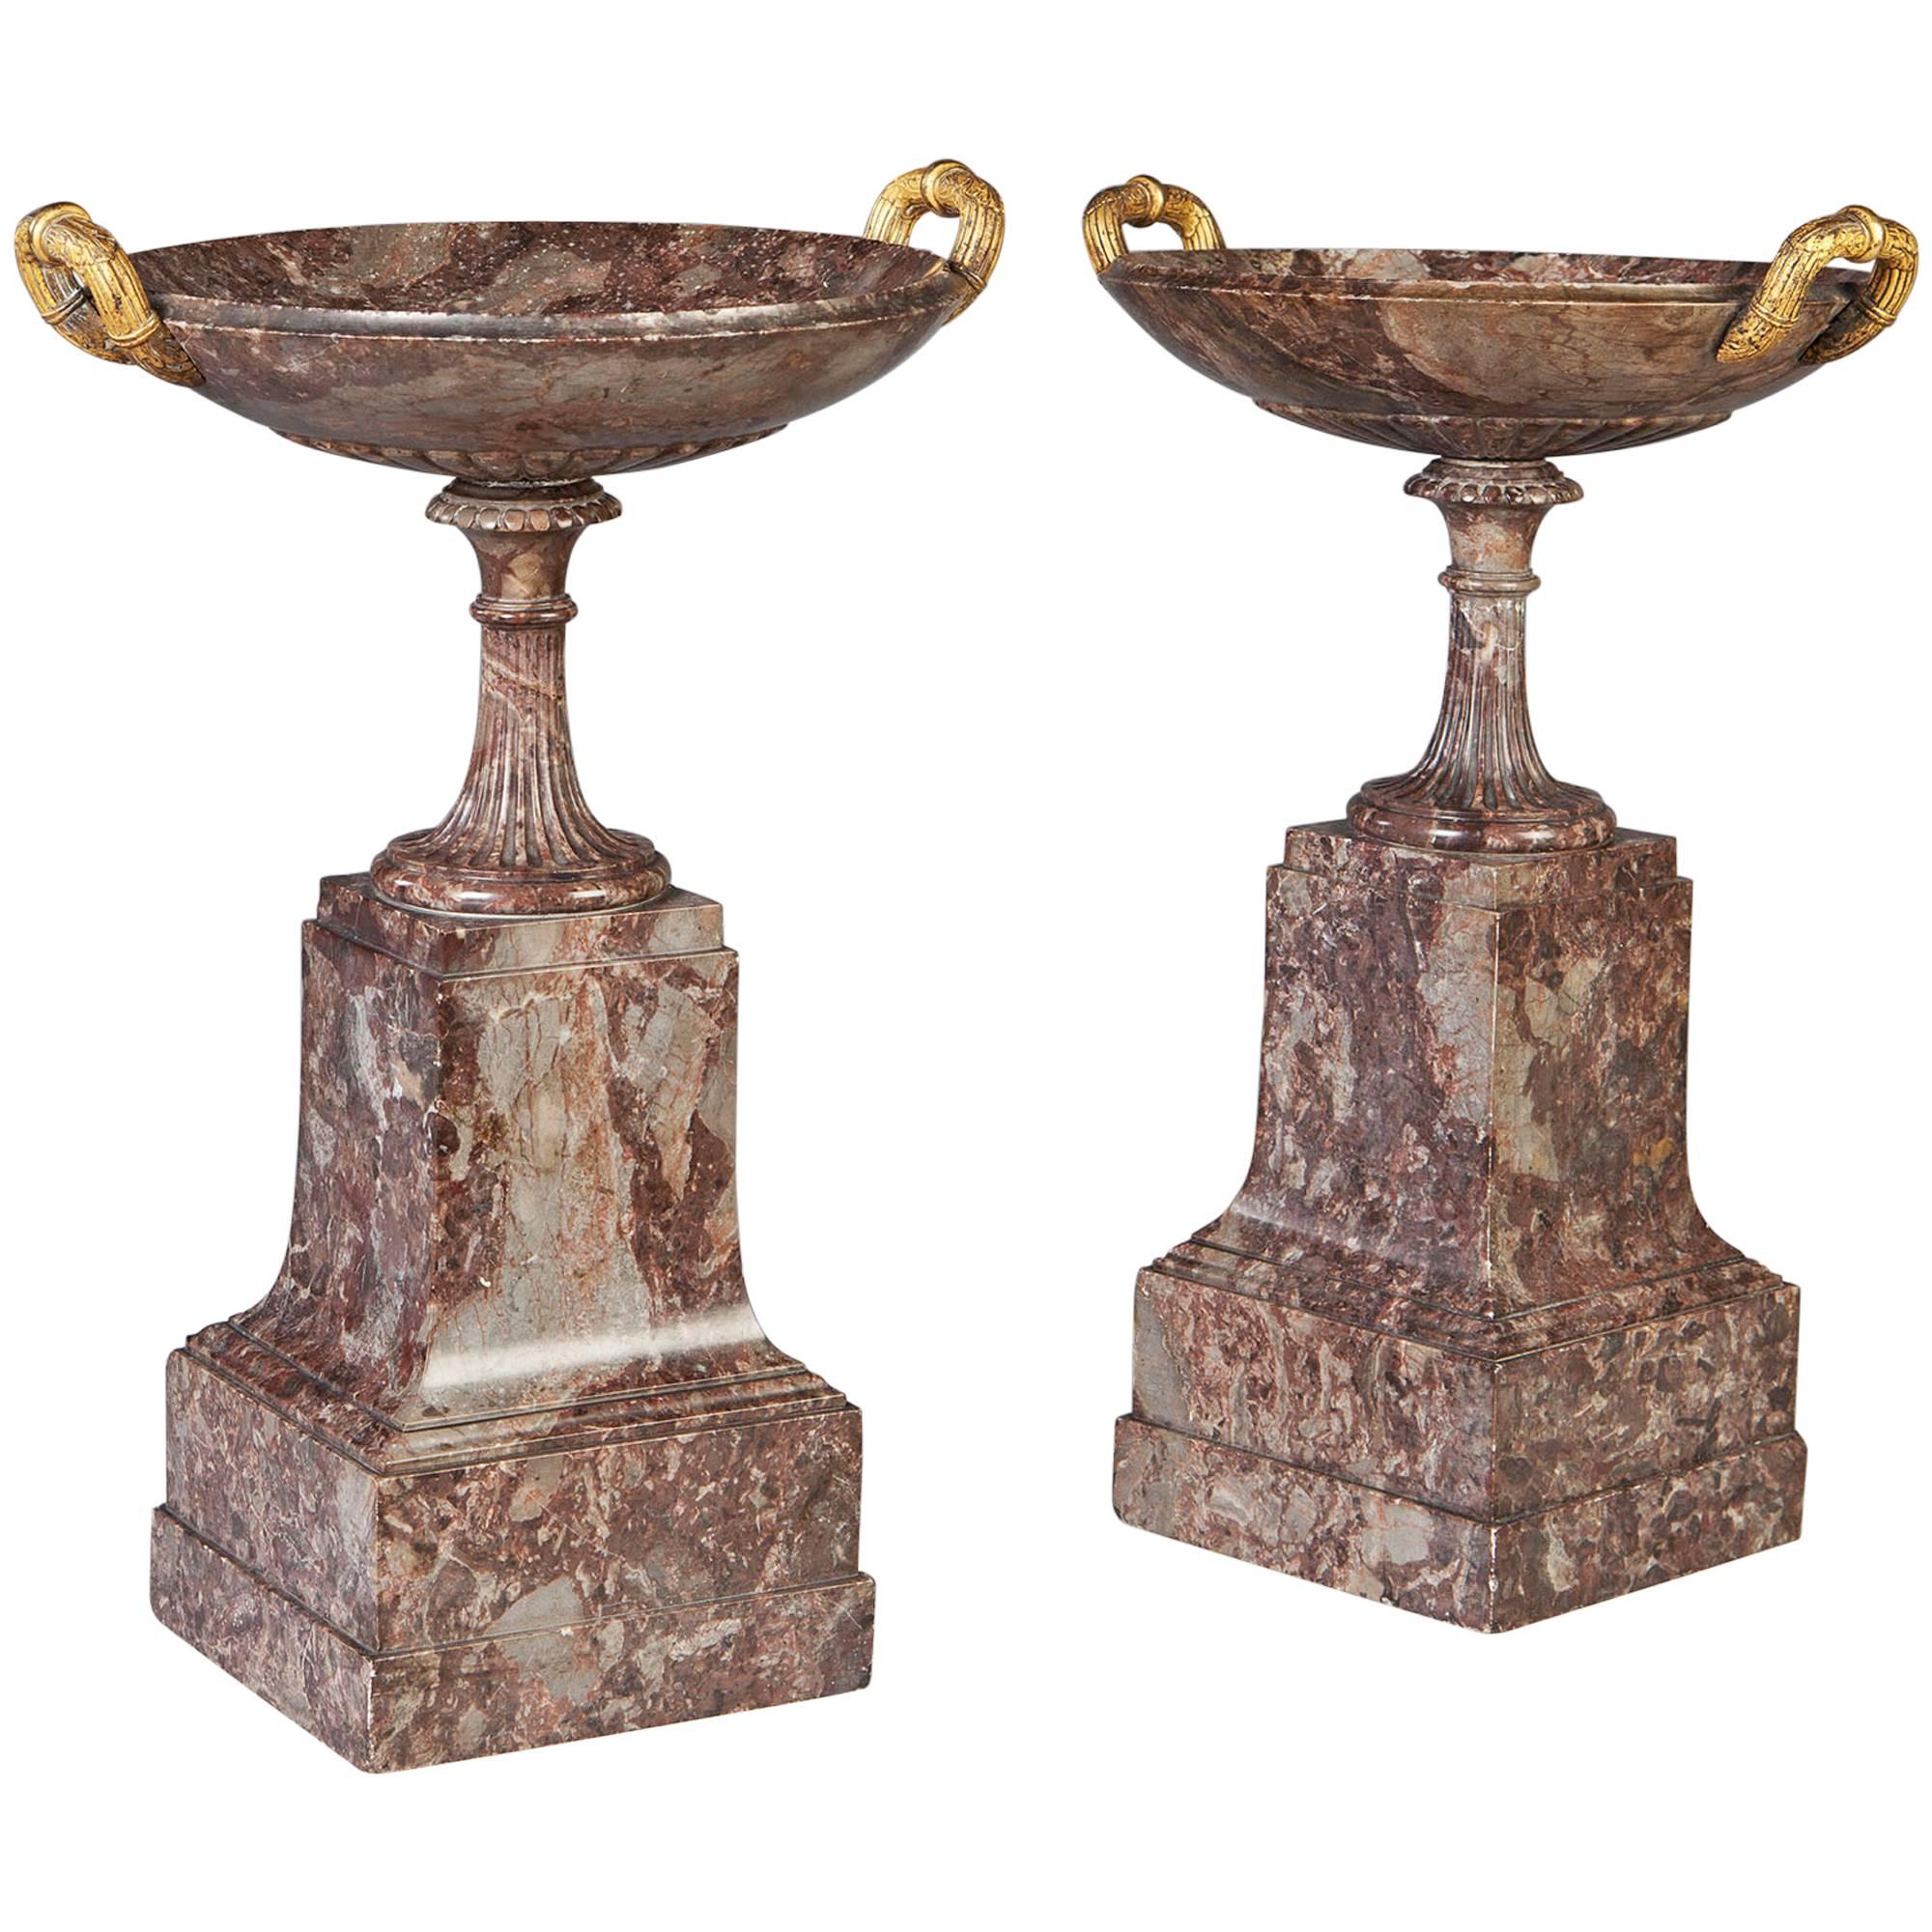 Pair of Italian Grand Tour Neoclassical Marble Tazza on Stands